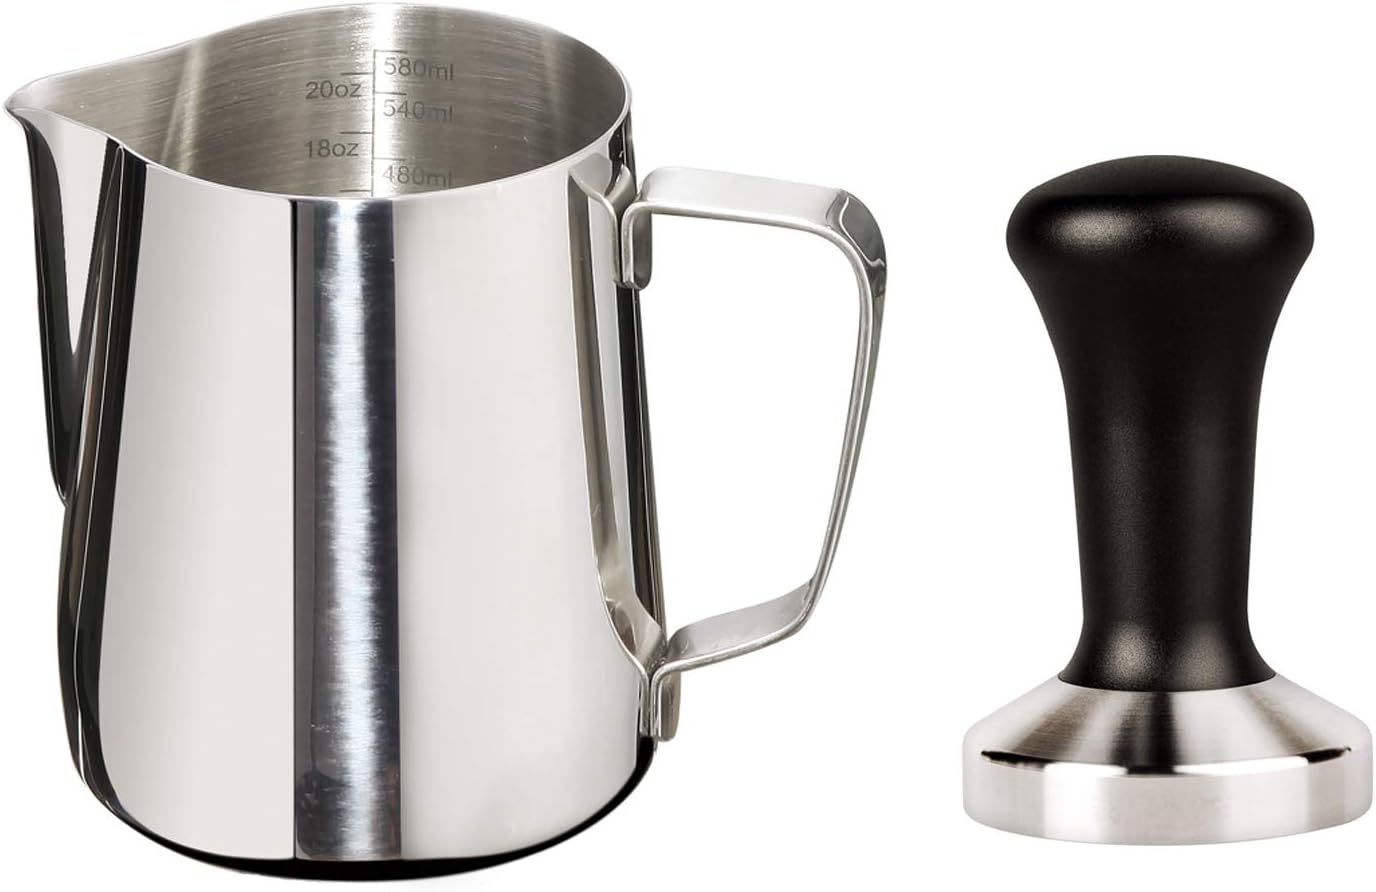 Joytata 20oz Milk Frothing Pitcher 53mm Stainless Steel Espresso Tamper Set-Milk Pitcher with Measurement Scale,Stainless Steel Steam Pitcher Coffee Tamper Set Perfect for Espresso Machine-Froth Cup